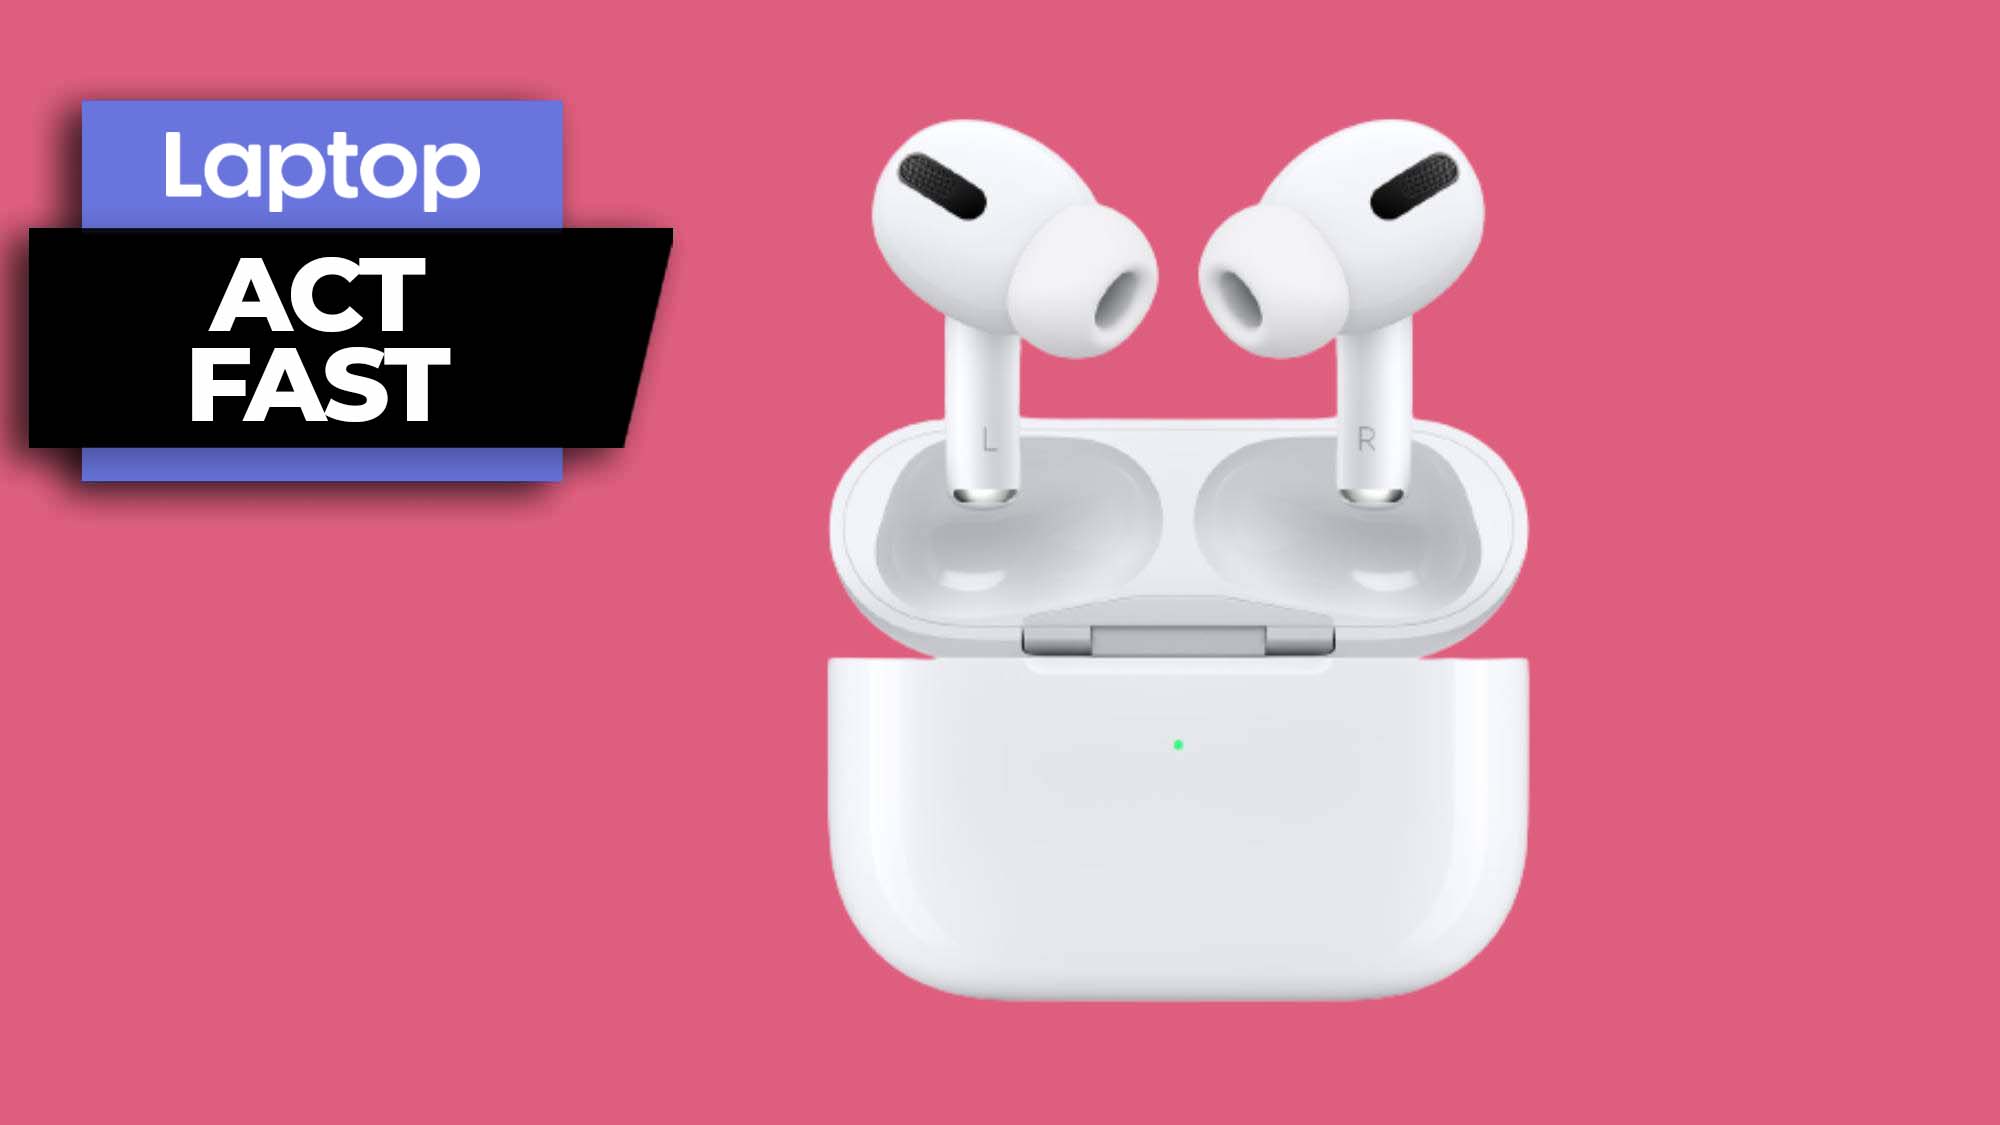 New AirPods Pro drop to $169 — don't miss this awesome deal 